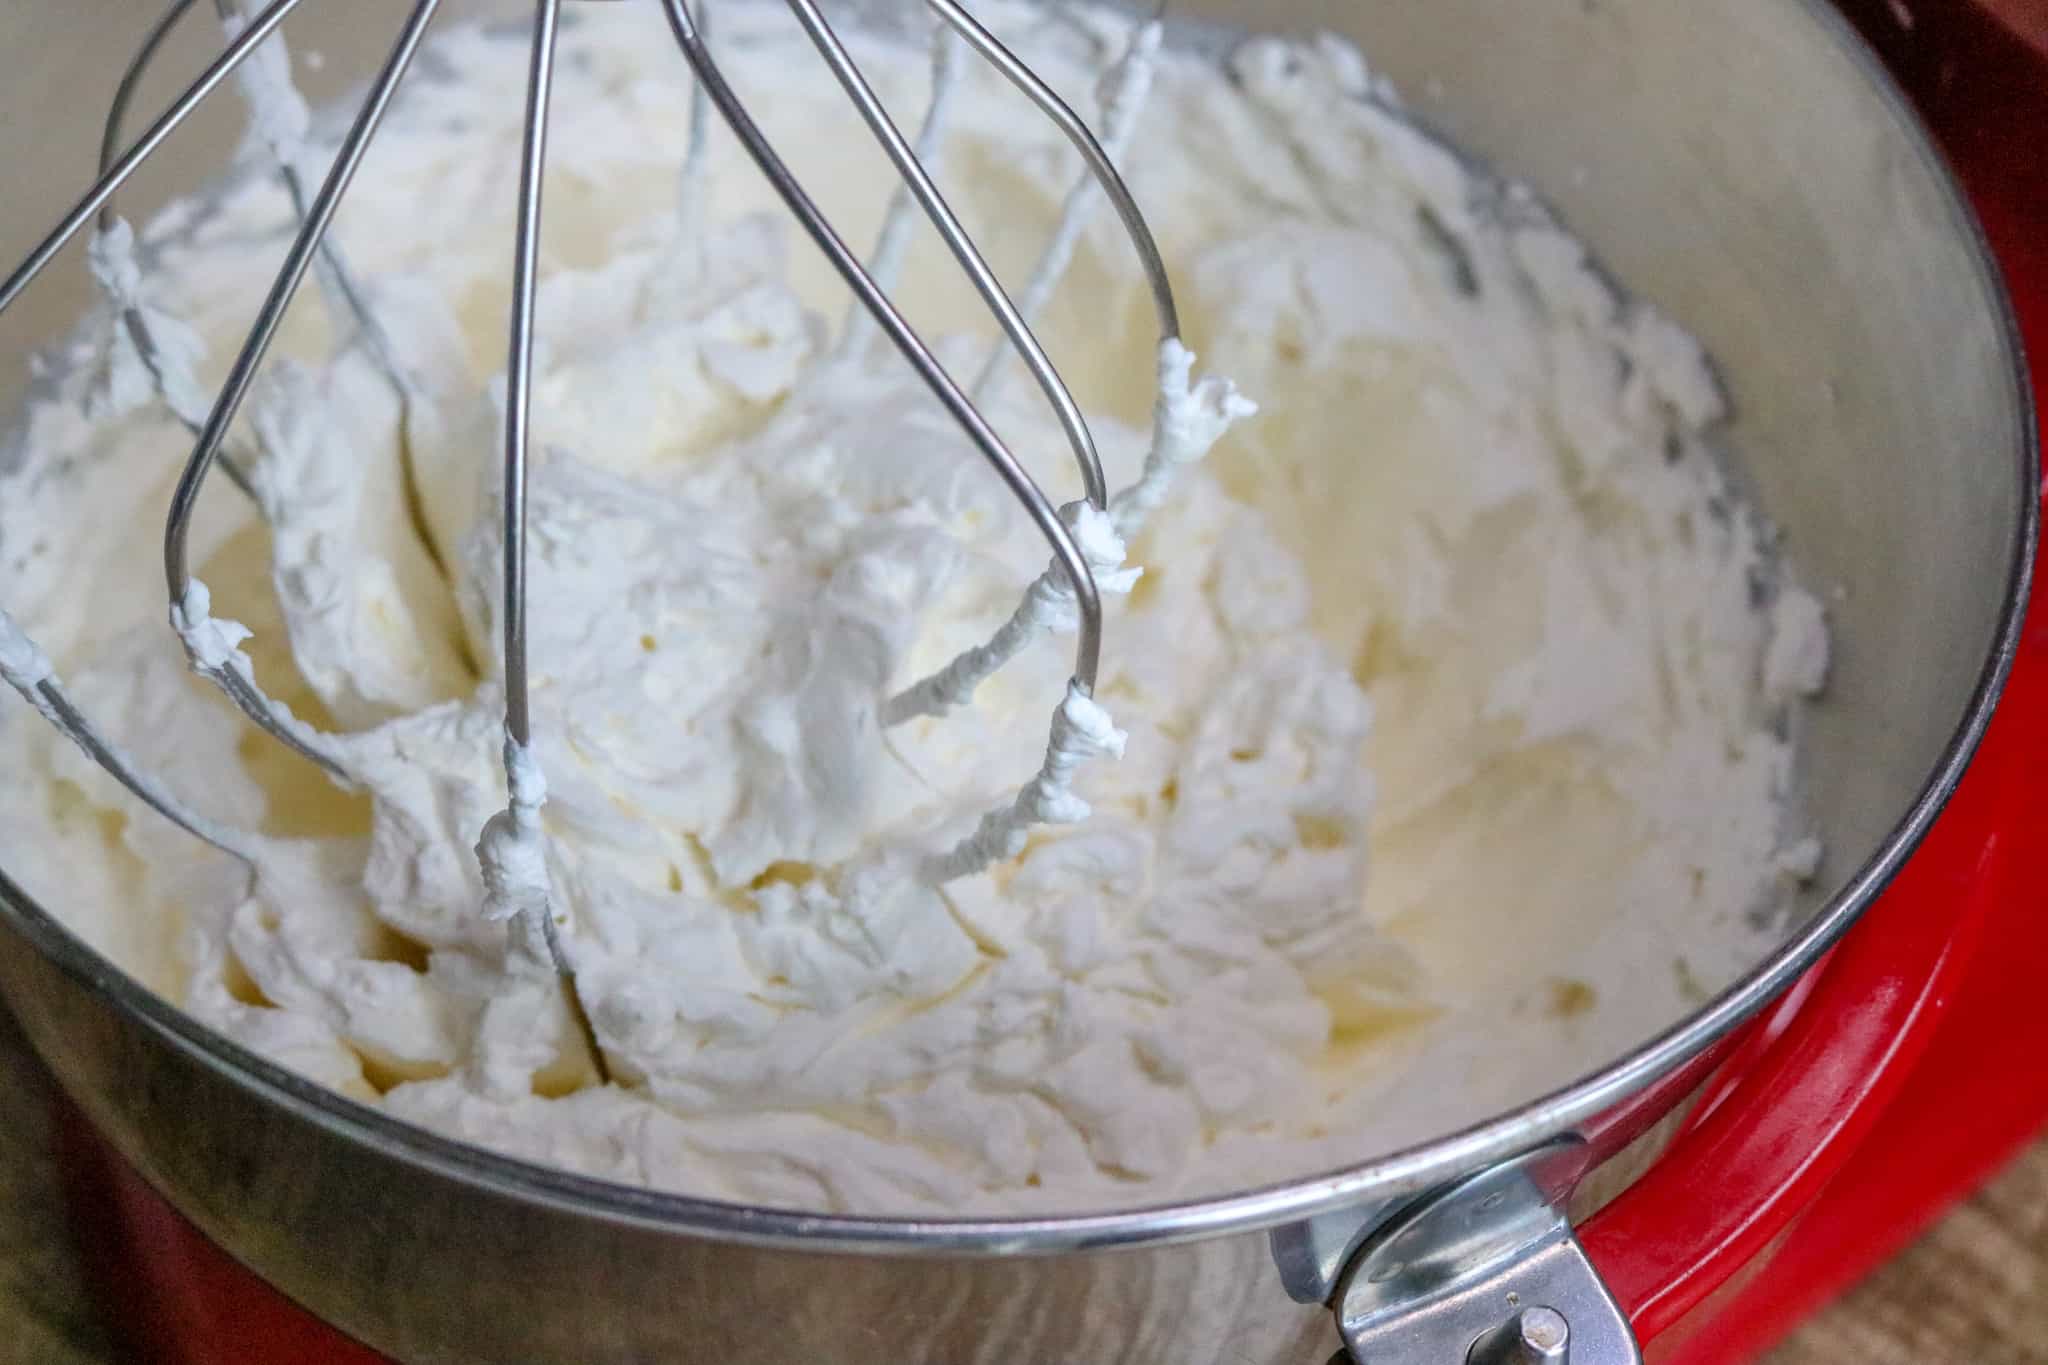 Cream being whipped with the whisk attachment in a mixer.